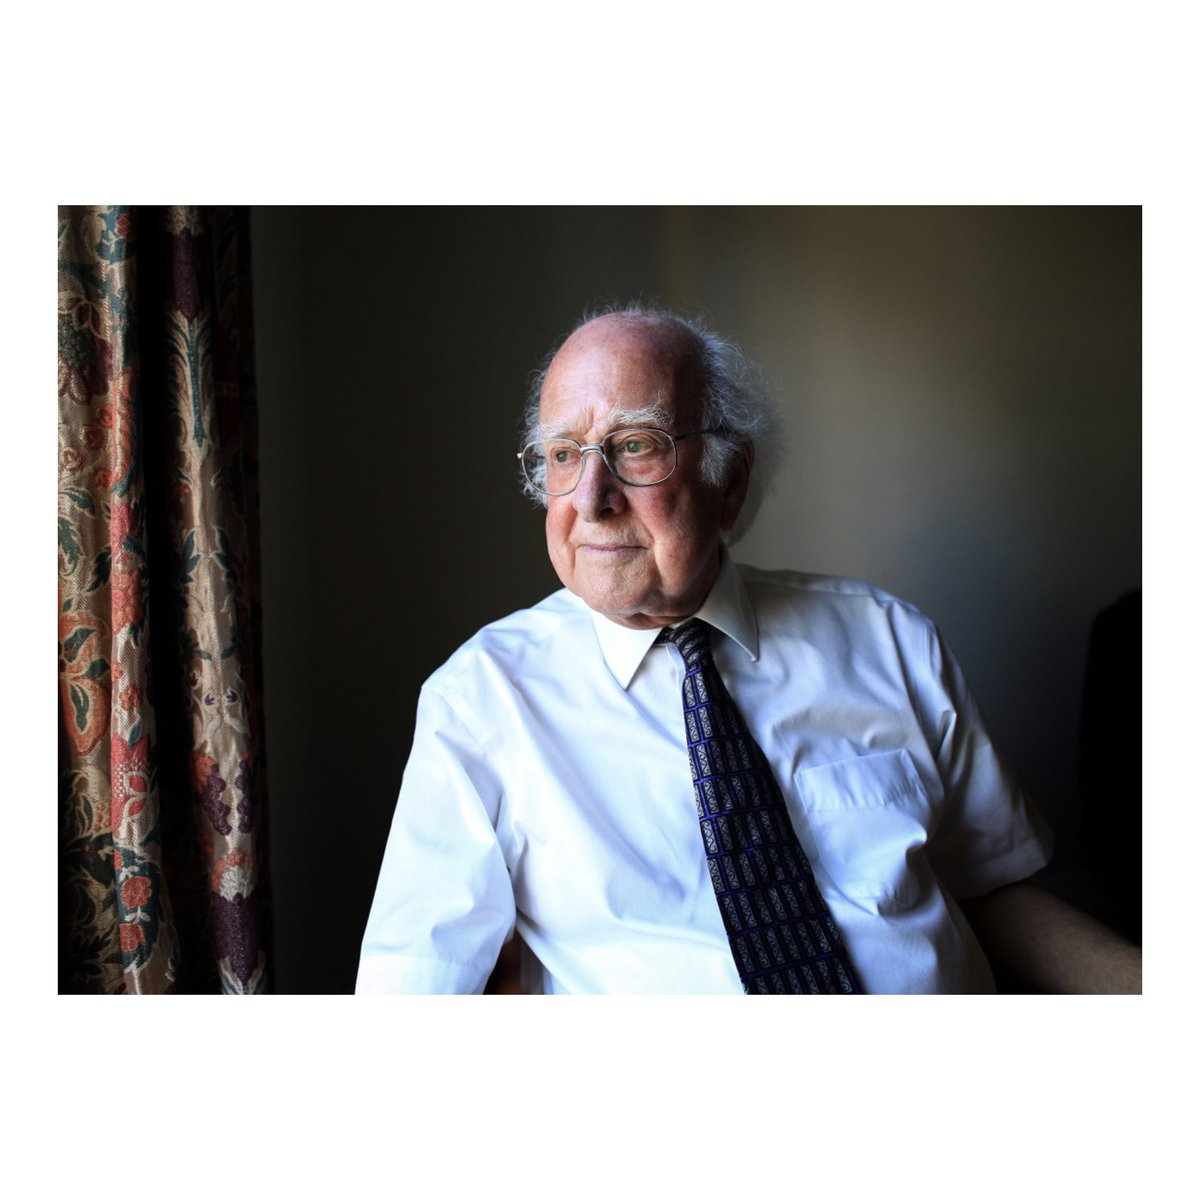 Sad to hear about the passing of Professor Peter Higgs. I had the opportunity to photograph him in Bristol a few years ago. I only had two minutes with him but still really like this photo. #professorhiggs